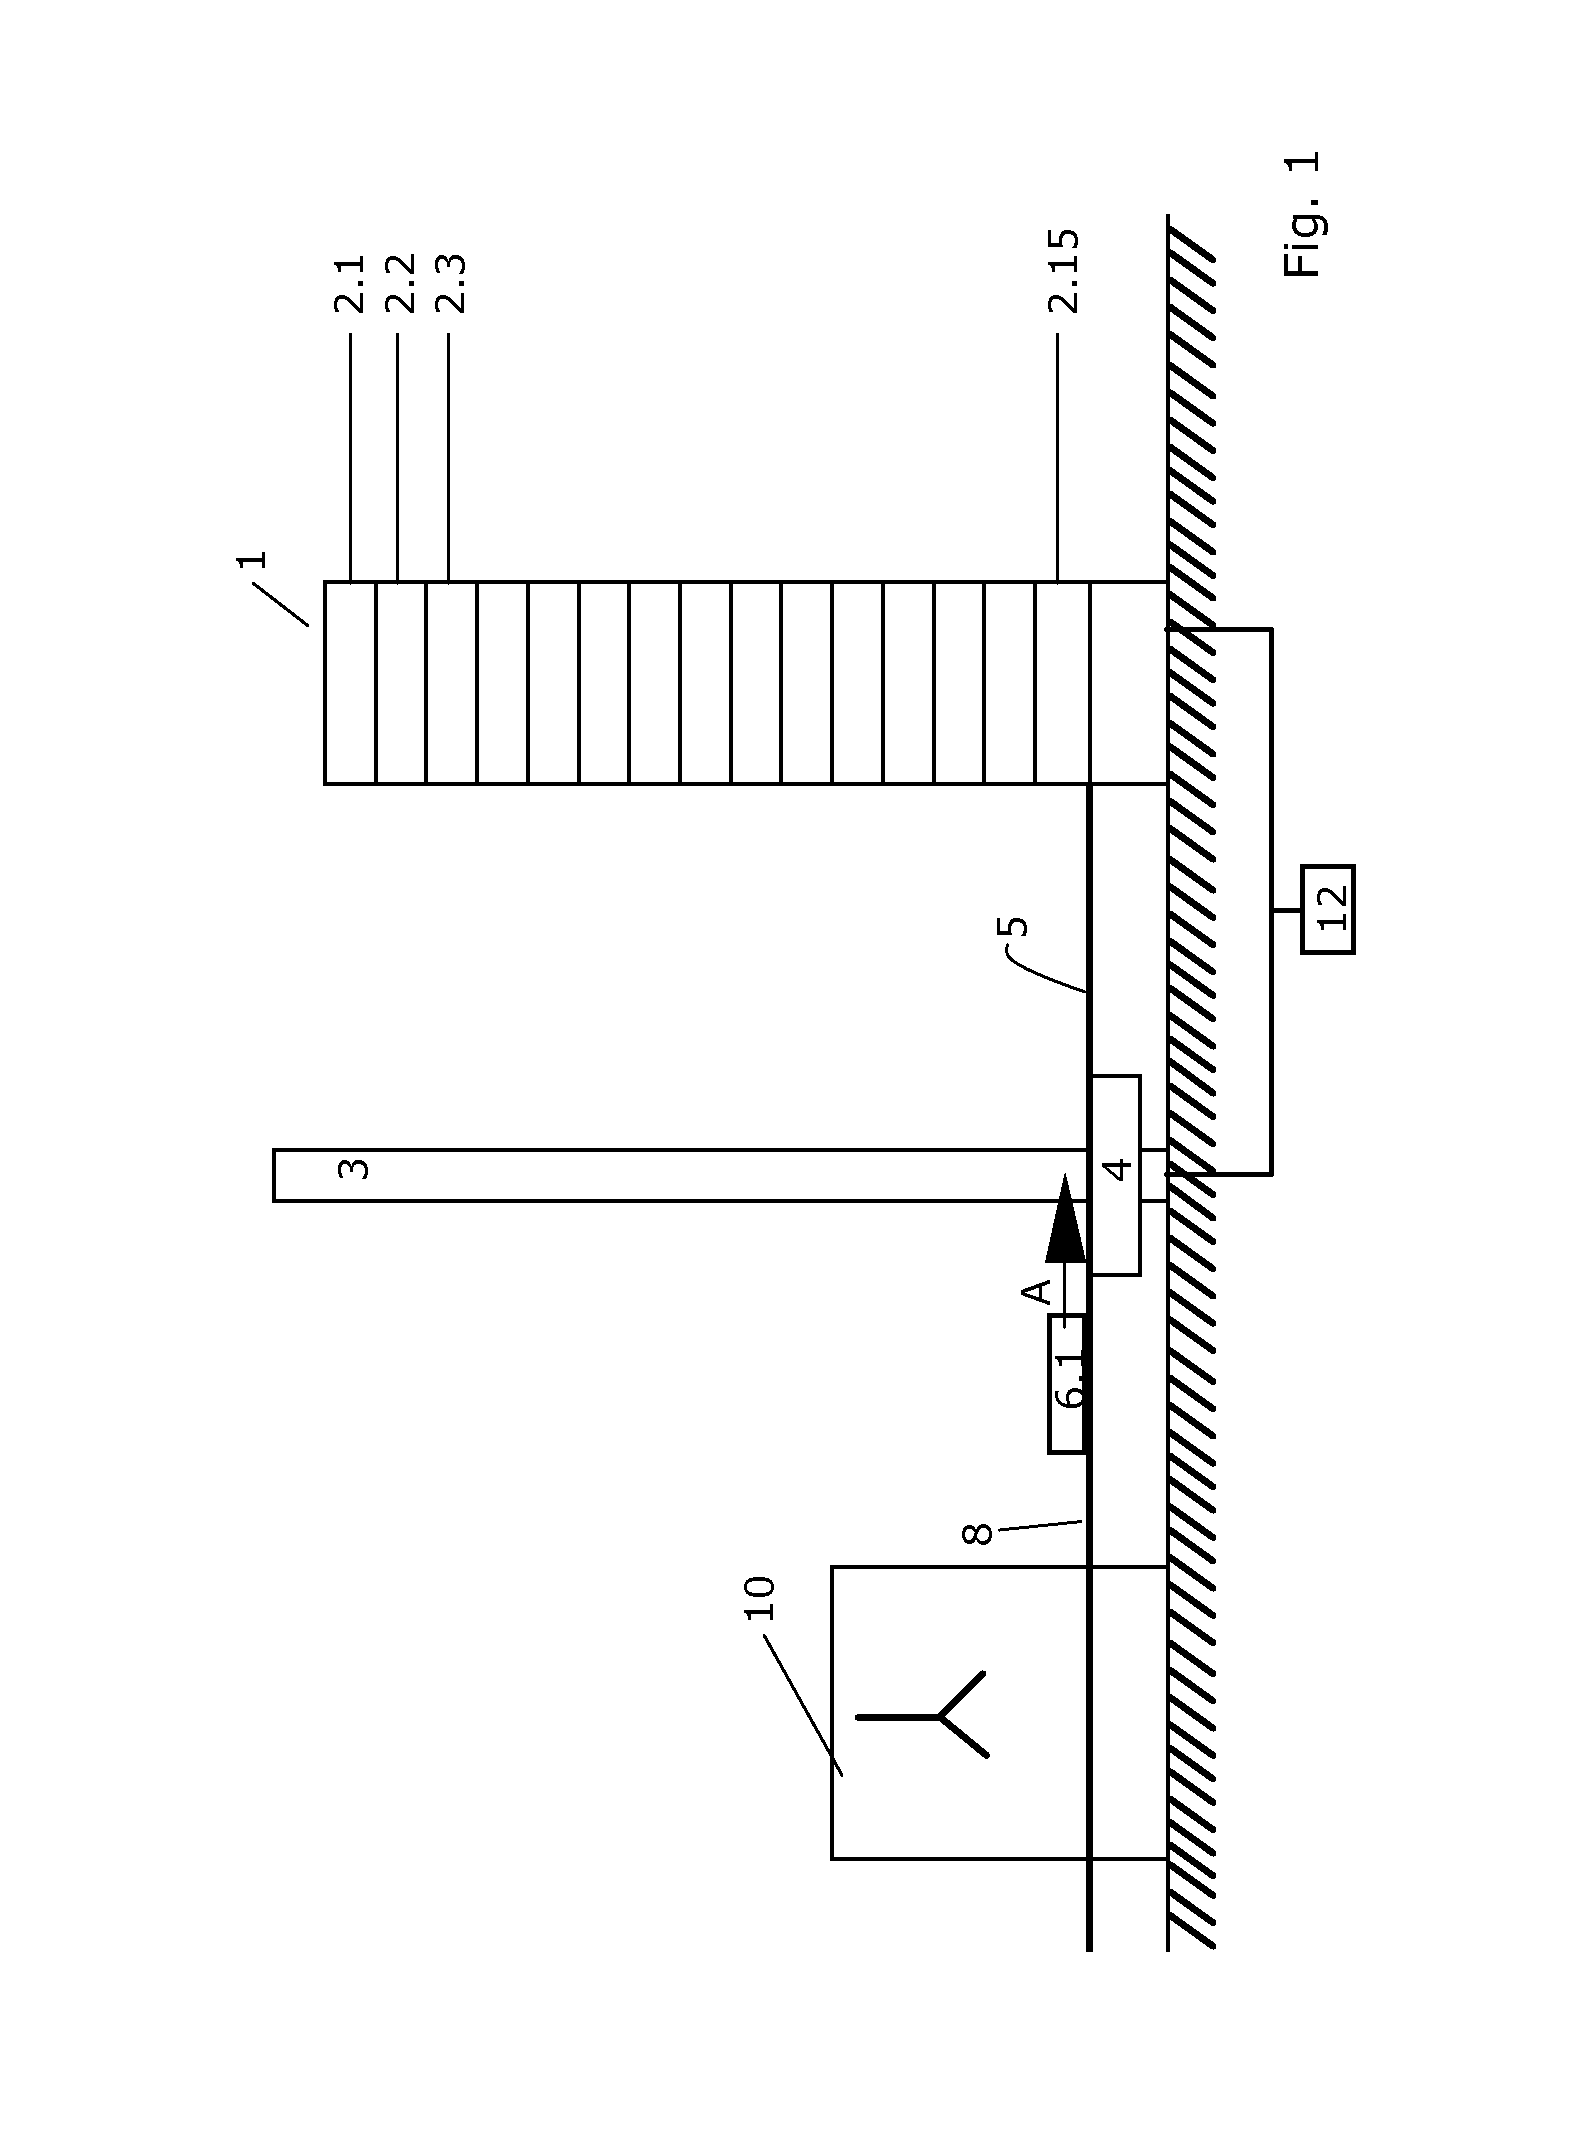 Method and apparatus for drying workpieces